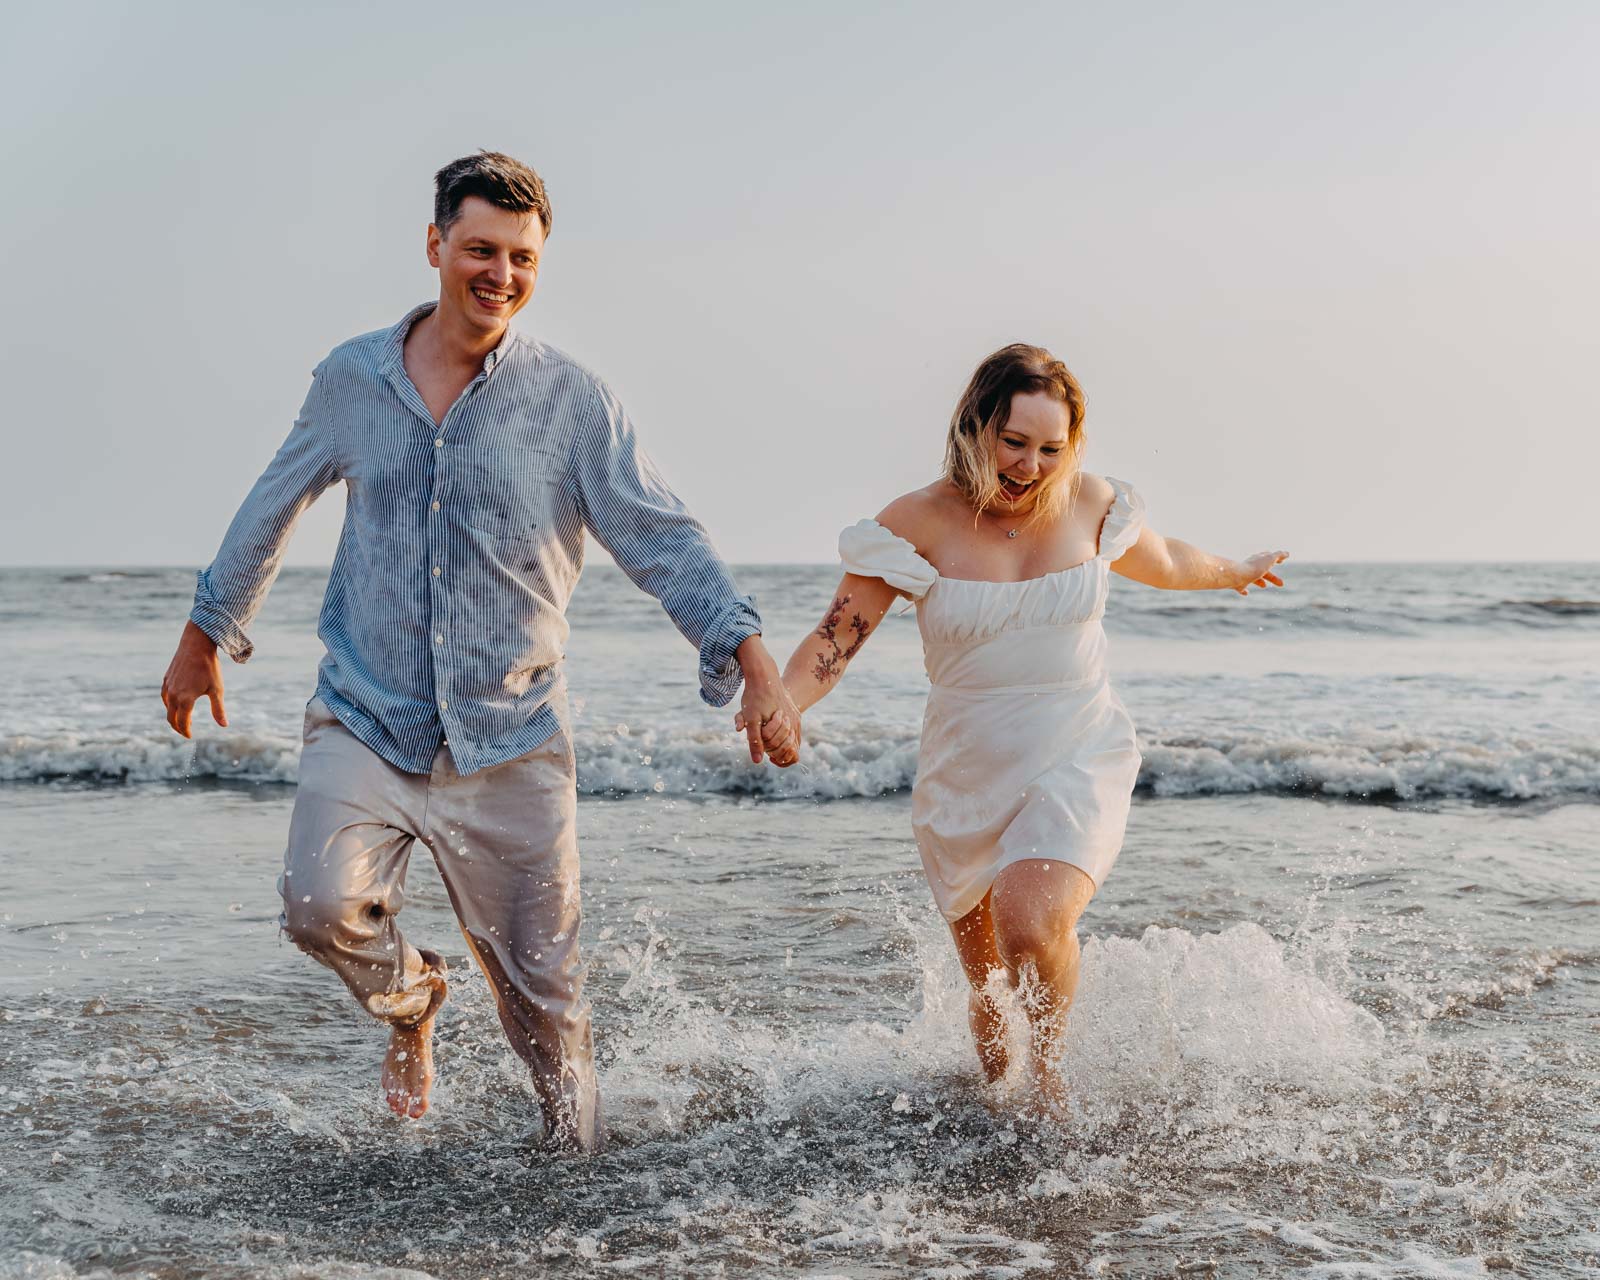 Engagement photoshoot - the couple is running on the water